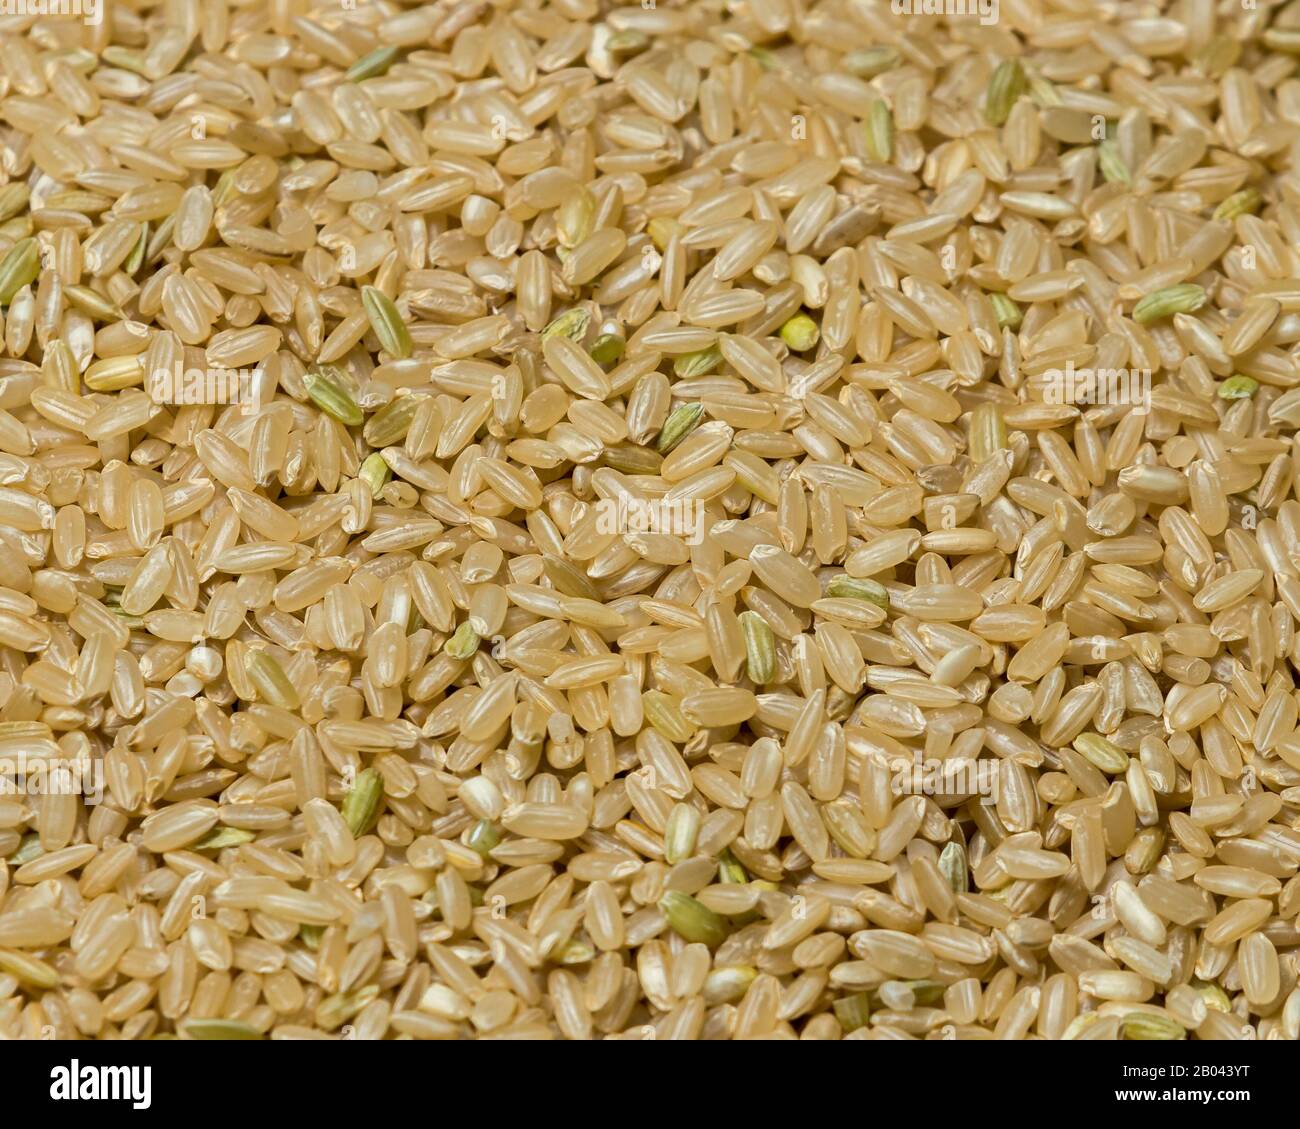 Closeup of brown whole grain rice seed, raw, uncooked Stock Photo